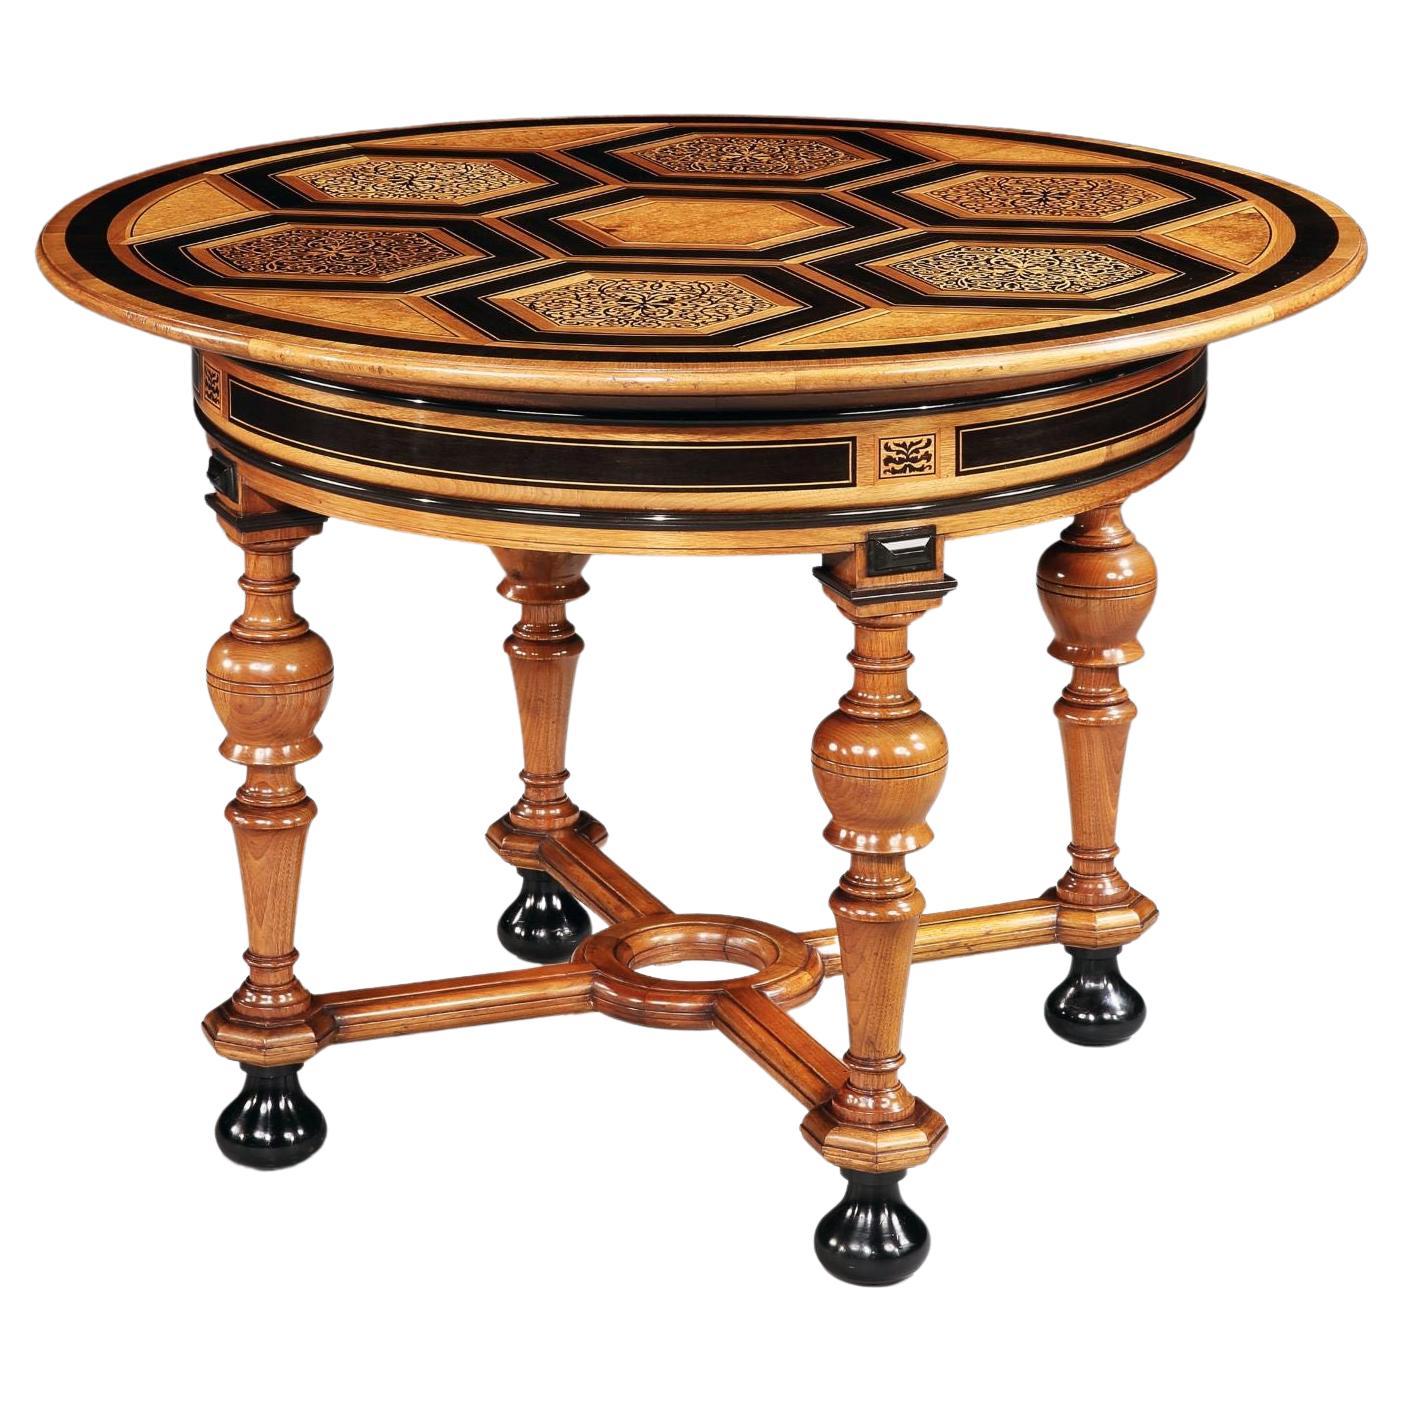 North European Late 19th Century Marquetry Centre Table For Sale